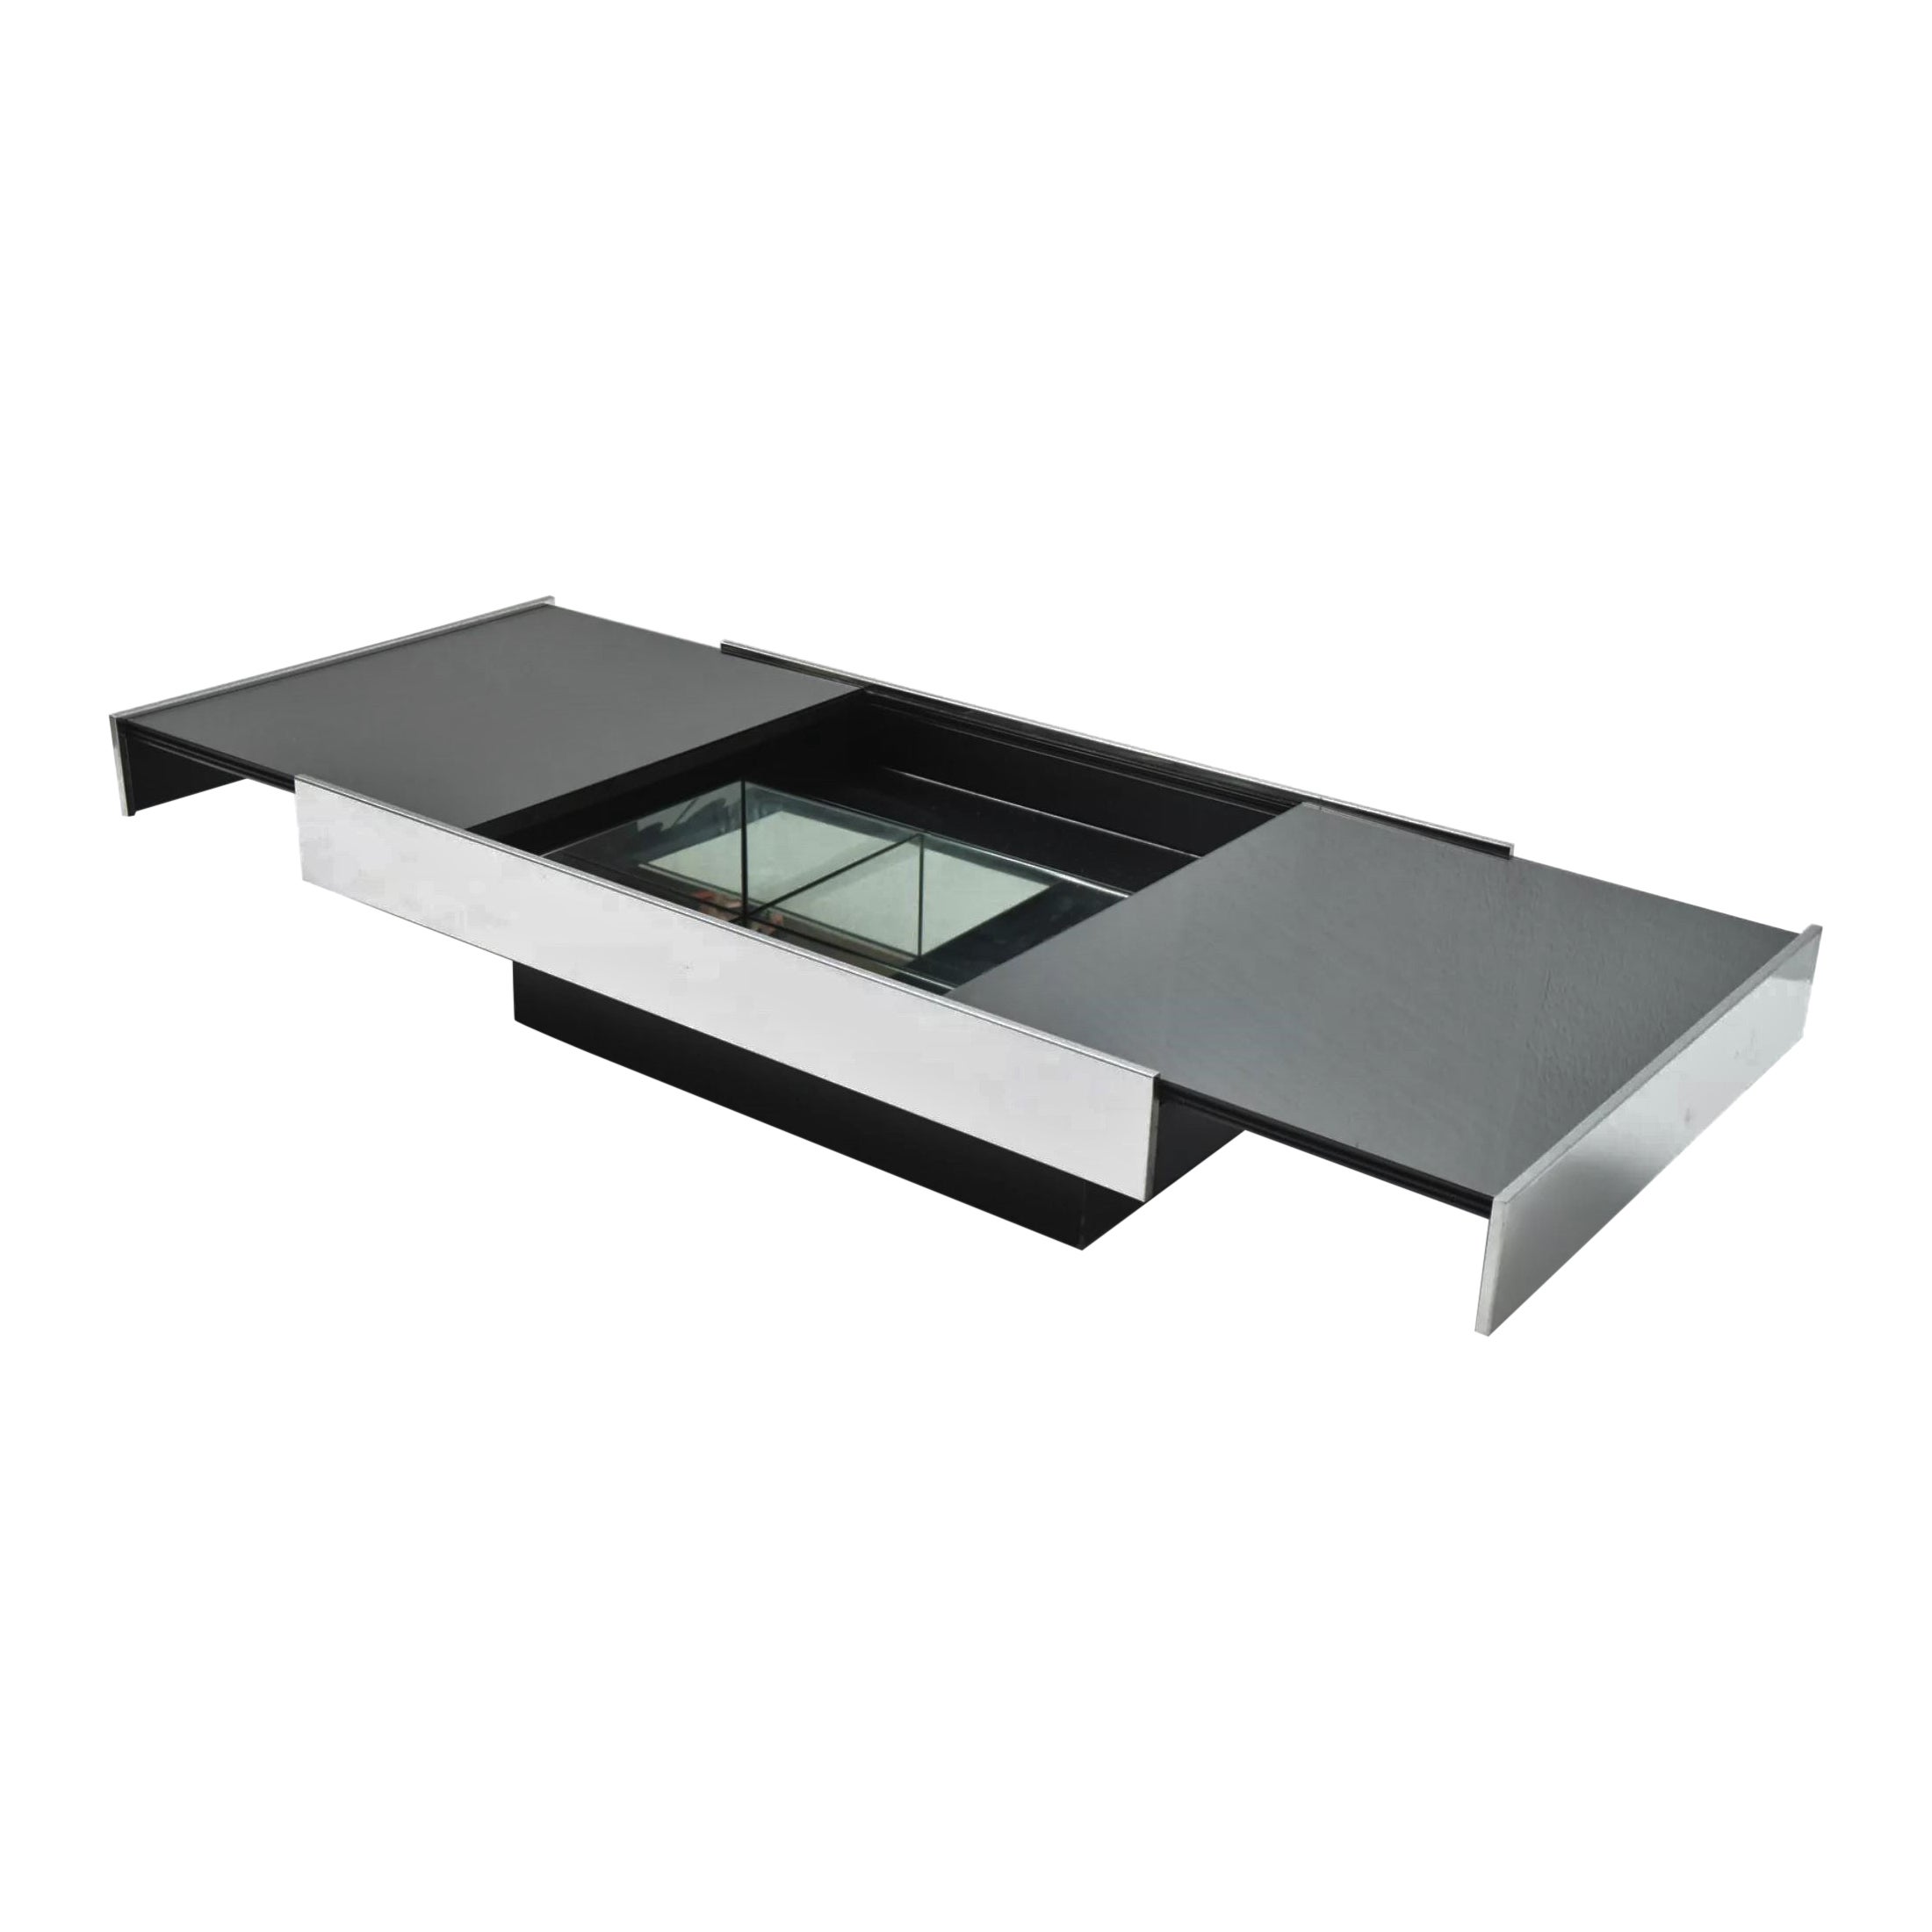 Willy Rizzo for Cidue 70s Bar Coffee Table, Design, Minimalist, 1970